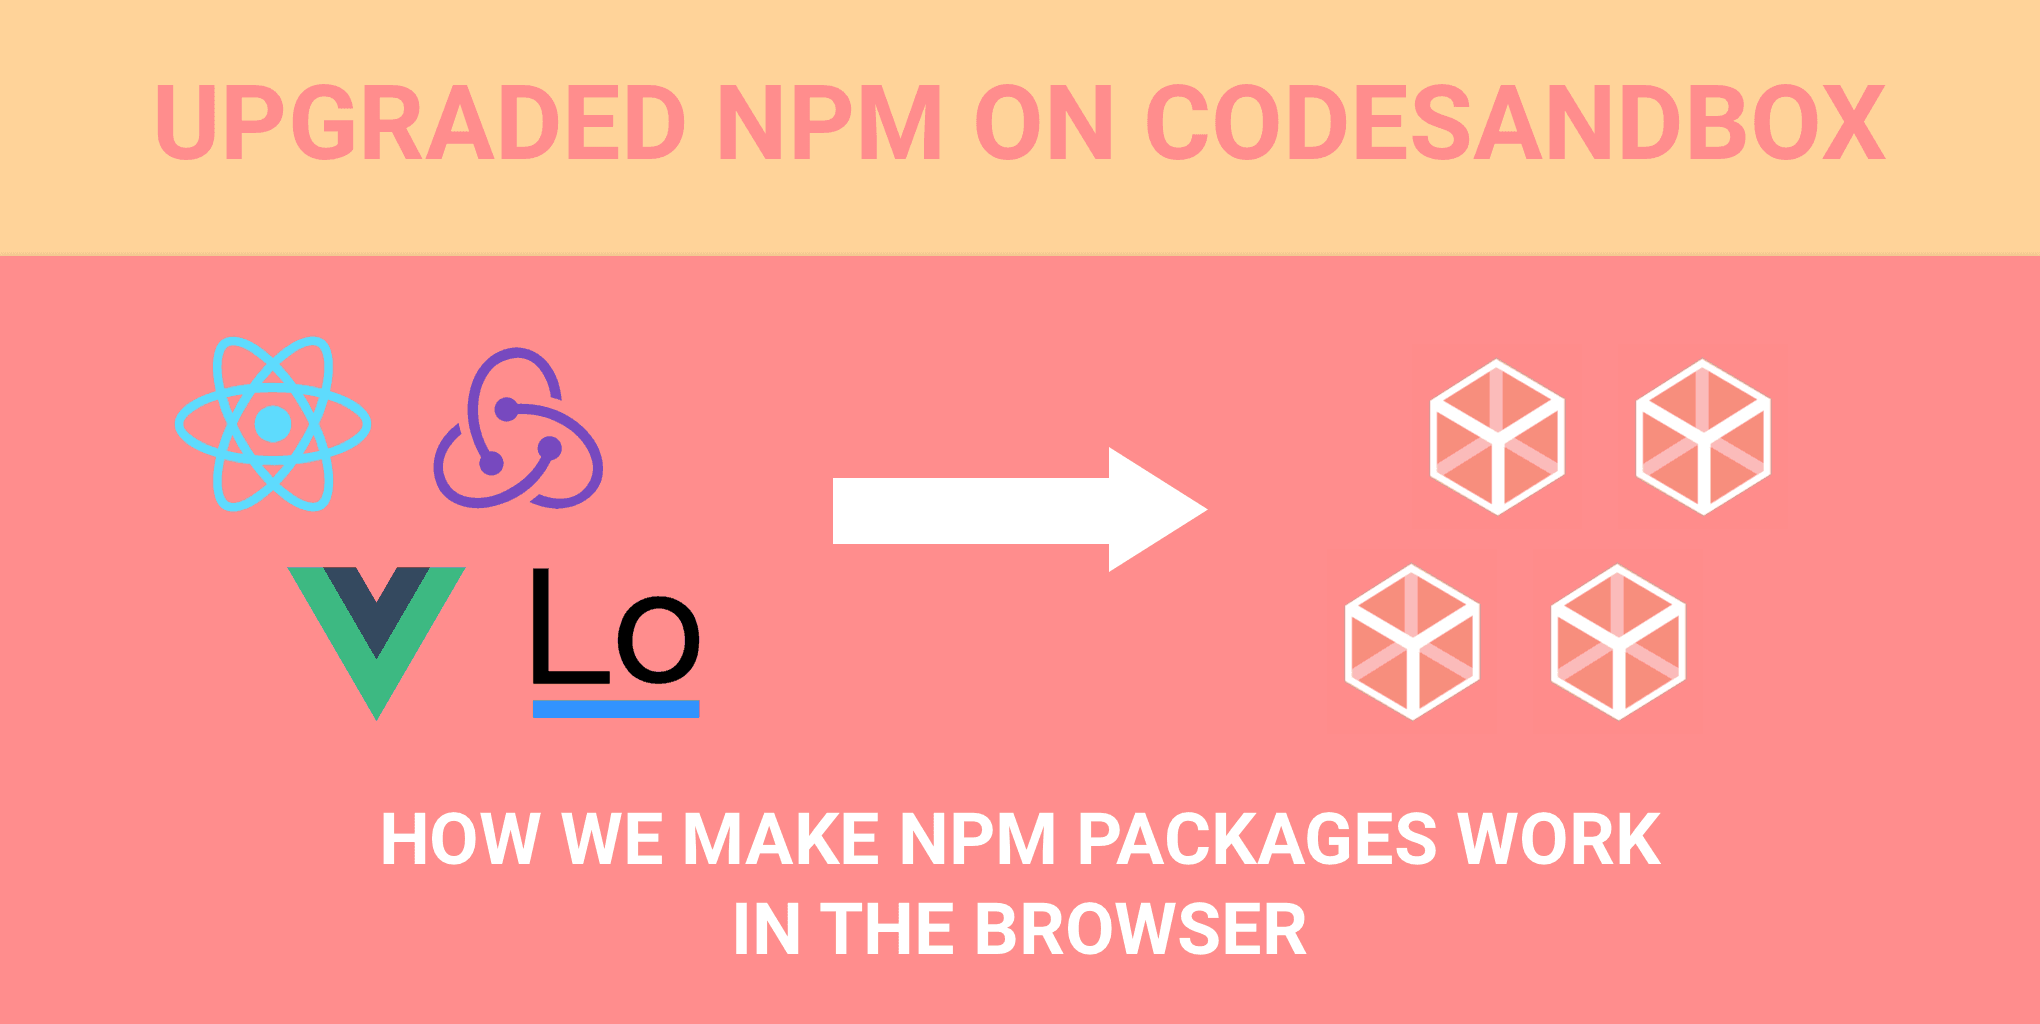 How we make npm packages work in the browser